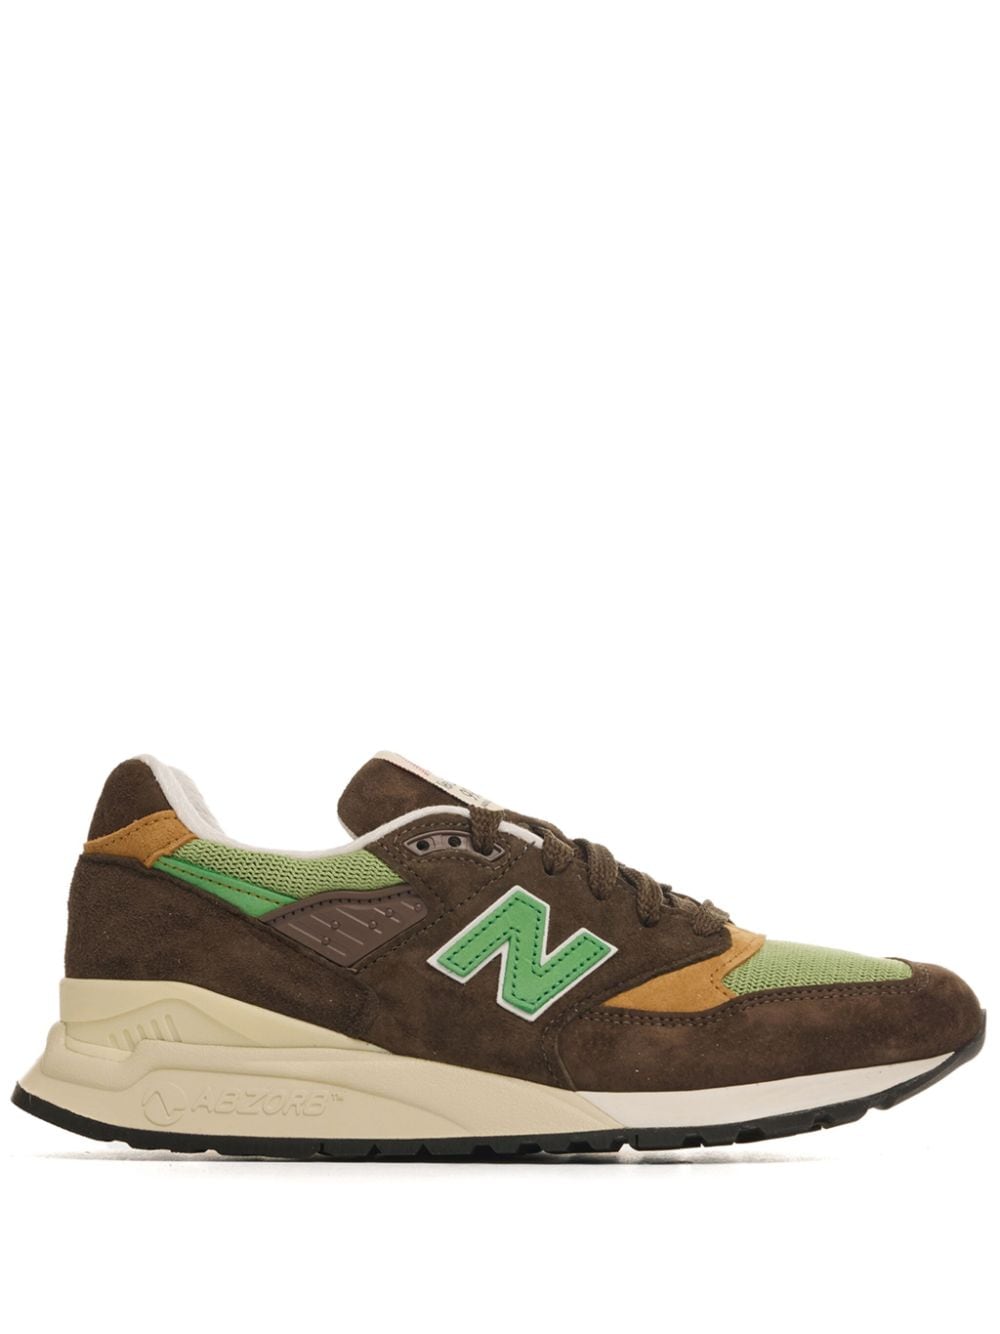 New Balance Made in USA 998 sneakers - Brown